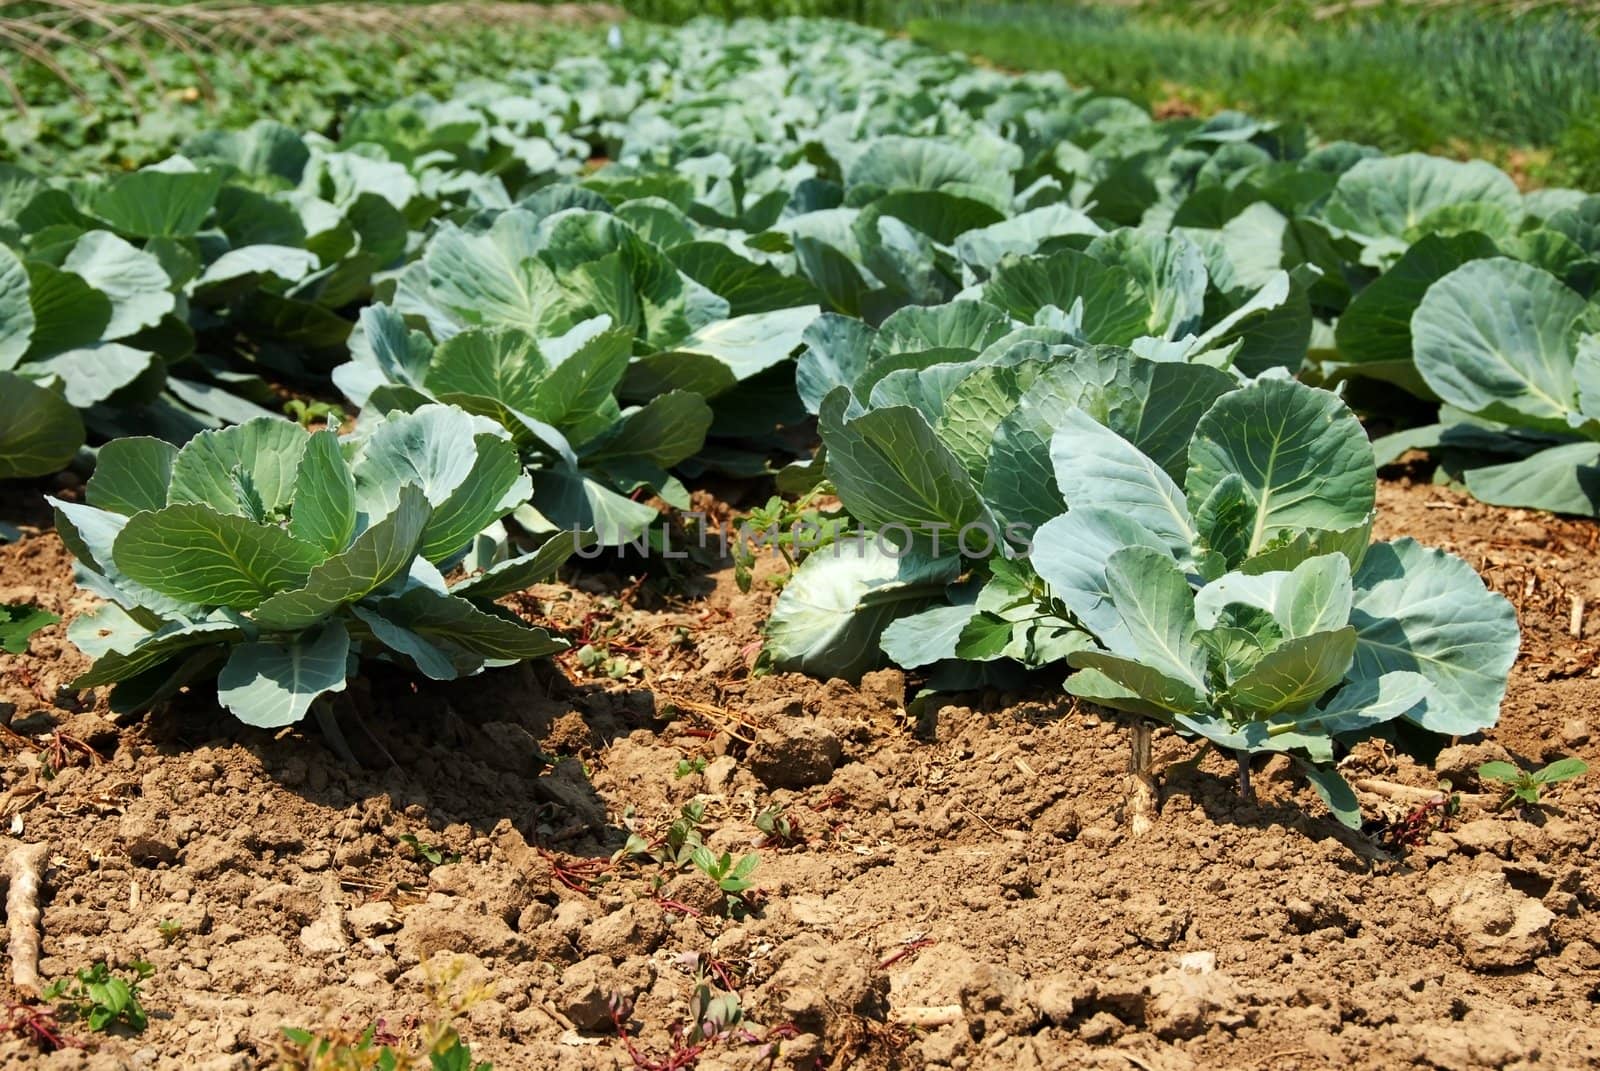 green cabbage in rows growing on field